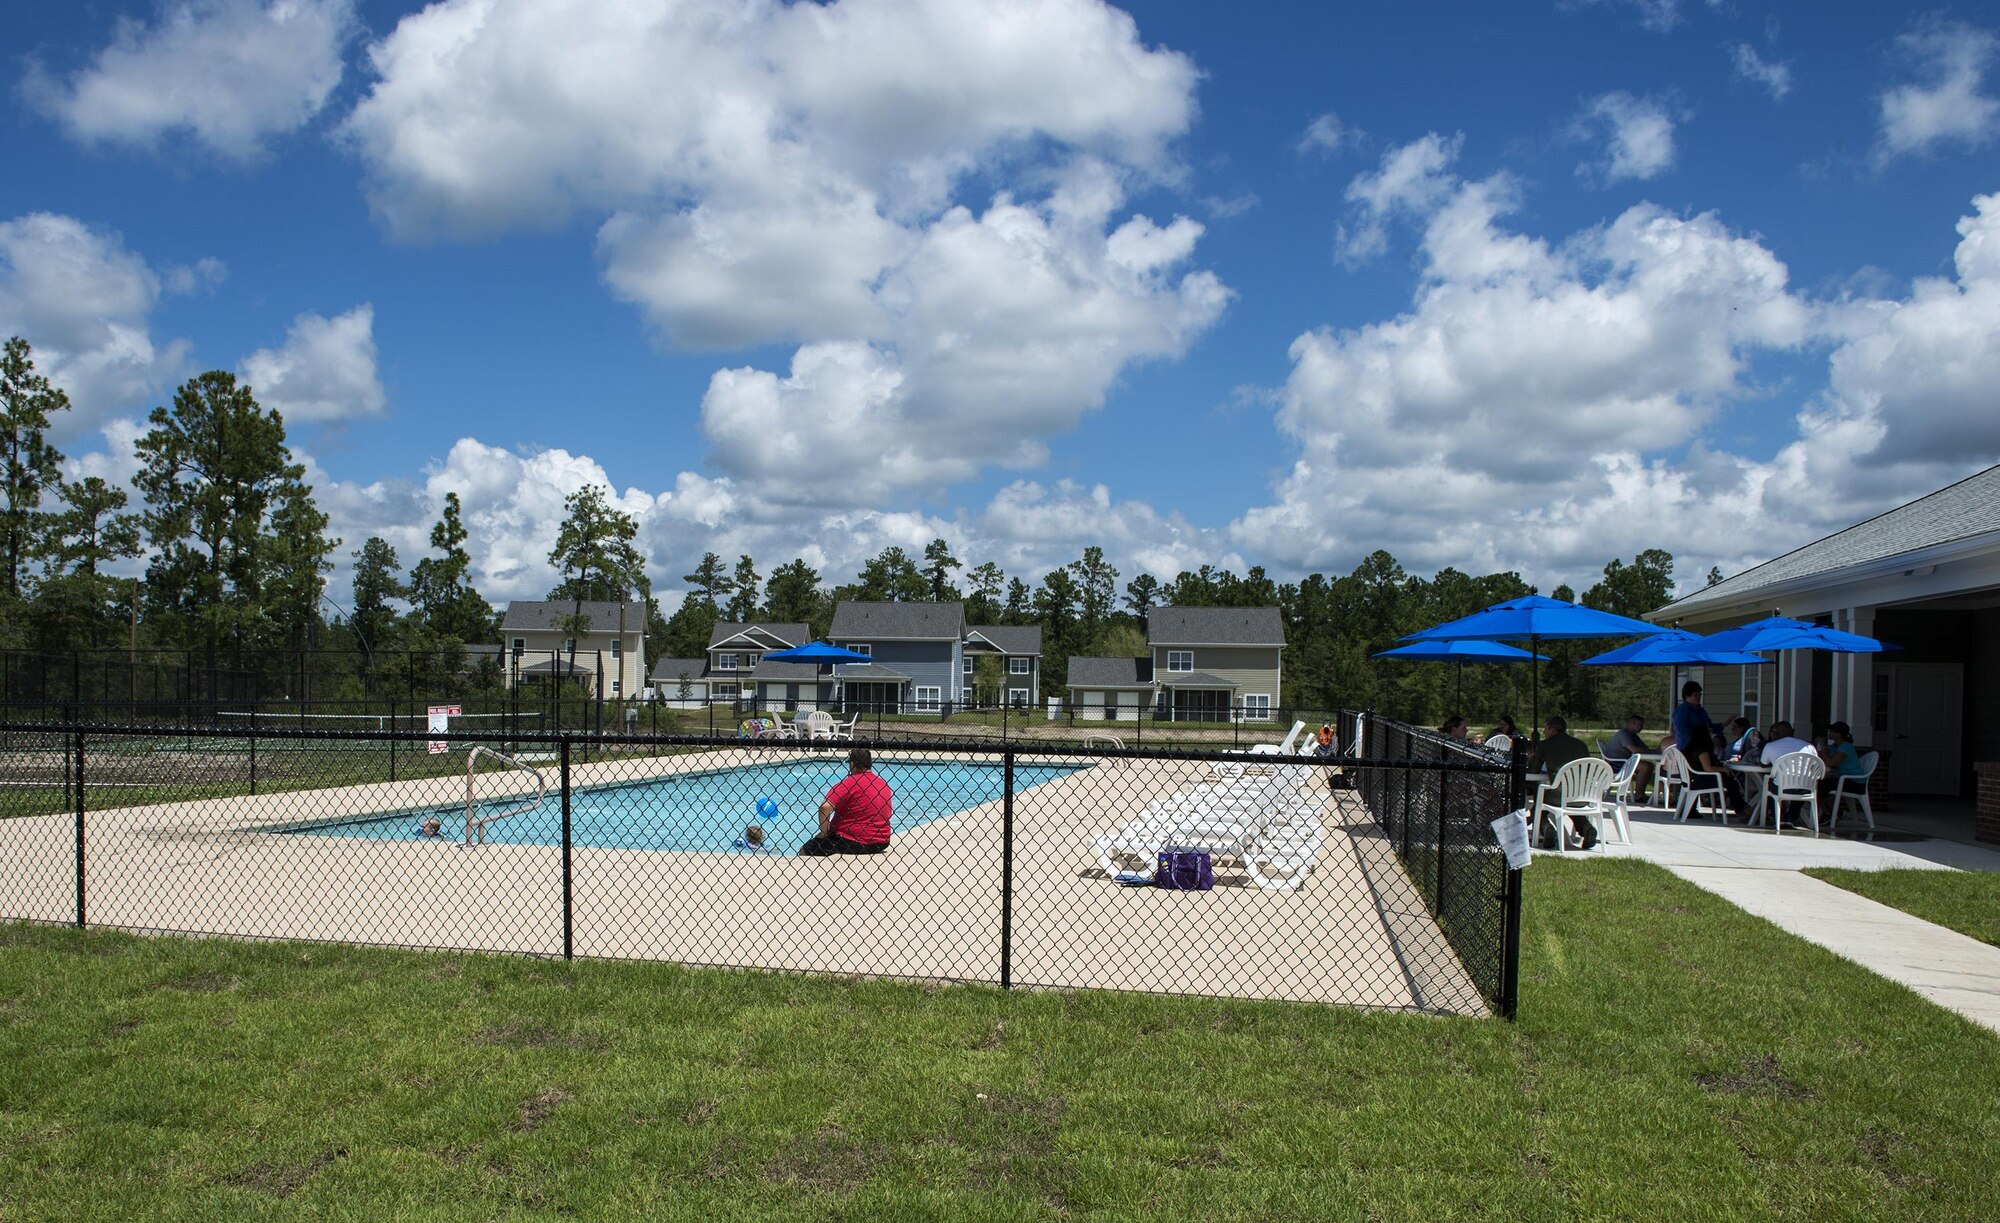 Residents eat barbeque and enjoy the pool during the grand opening of the community center in Azalea Commons, Aug. 12, 2016, in Valdosta, Ga. Azalea Commons houses 90 military families between E-1 and O-5. (U.S. Air Force photo by Airman 1st Class Janiqua P. Robinson)